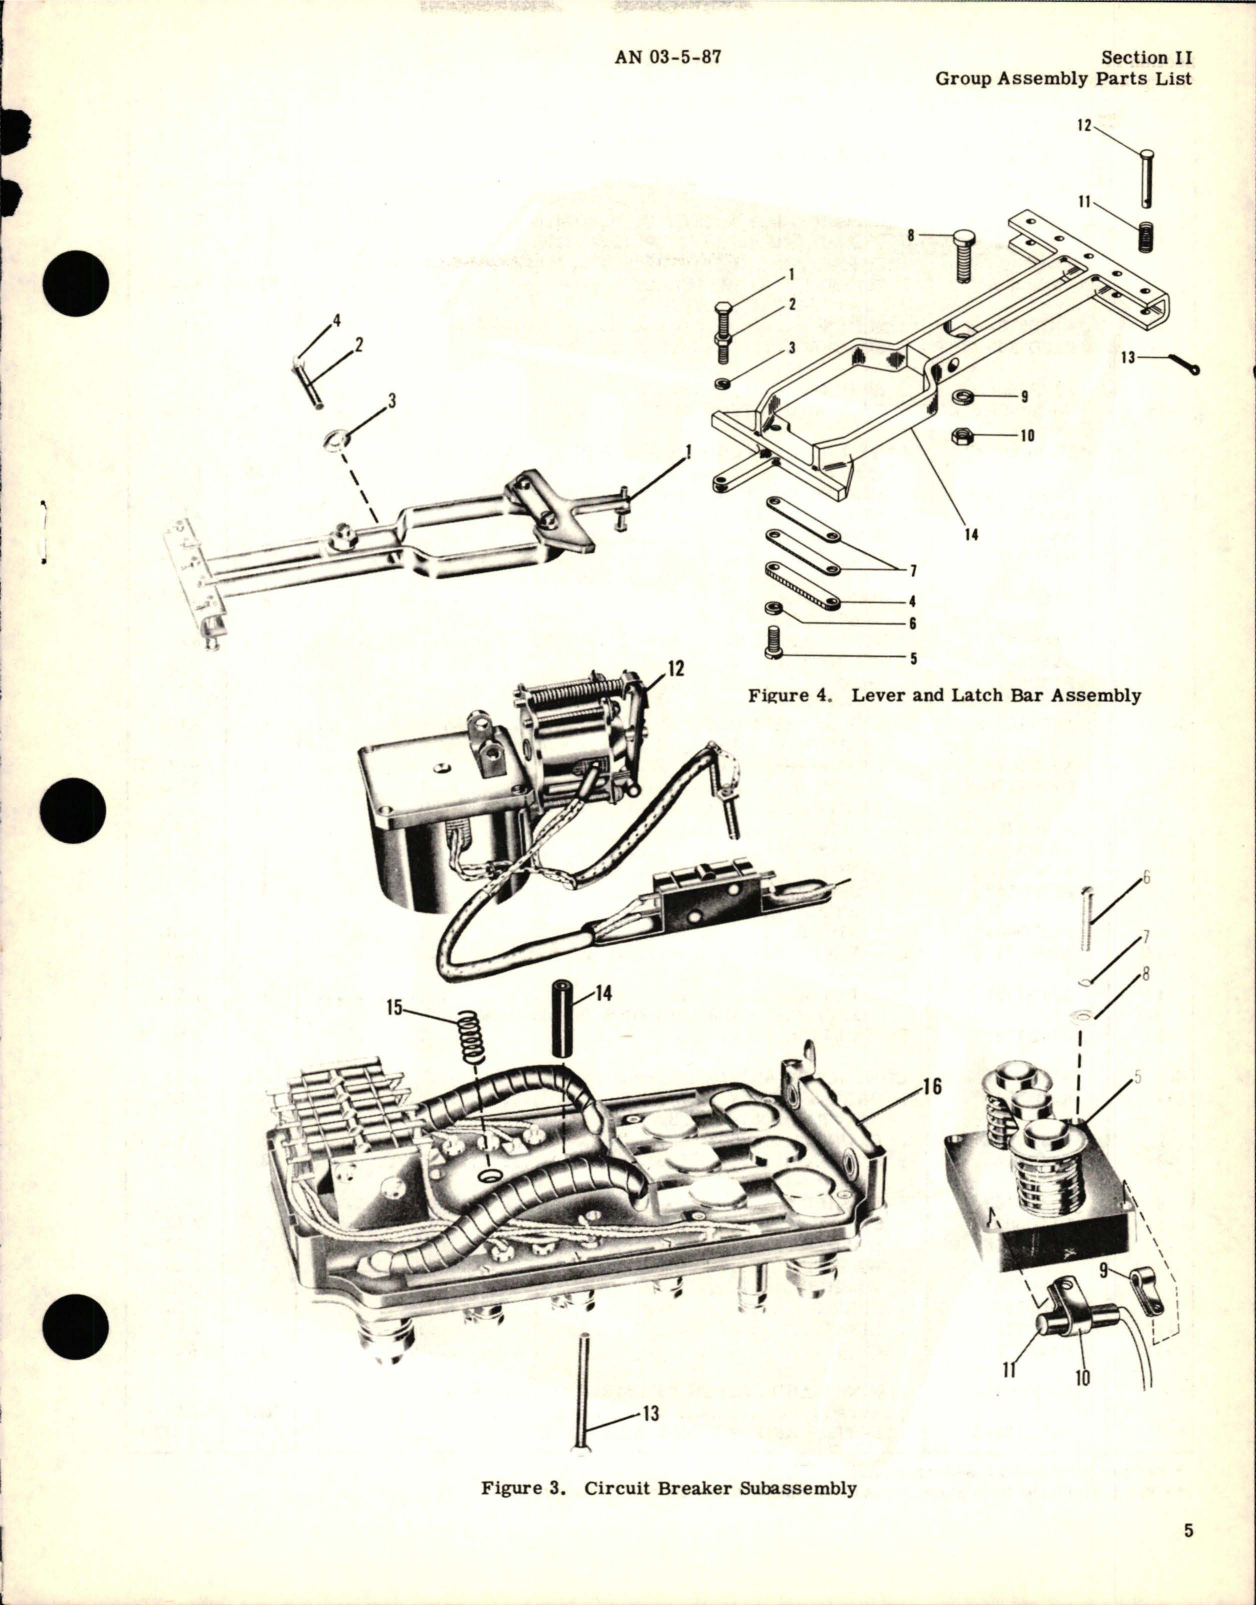 Sample page 7 from AirCorps Library document: Illustrated Parts Breakdown for Circuit Breaker  - Parts A14B1805, A14B1805A, A14B1805B, A14B1805C, A14B1805C-2, and A14B1805C-3